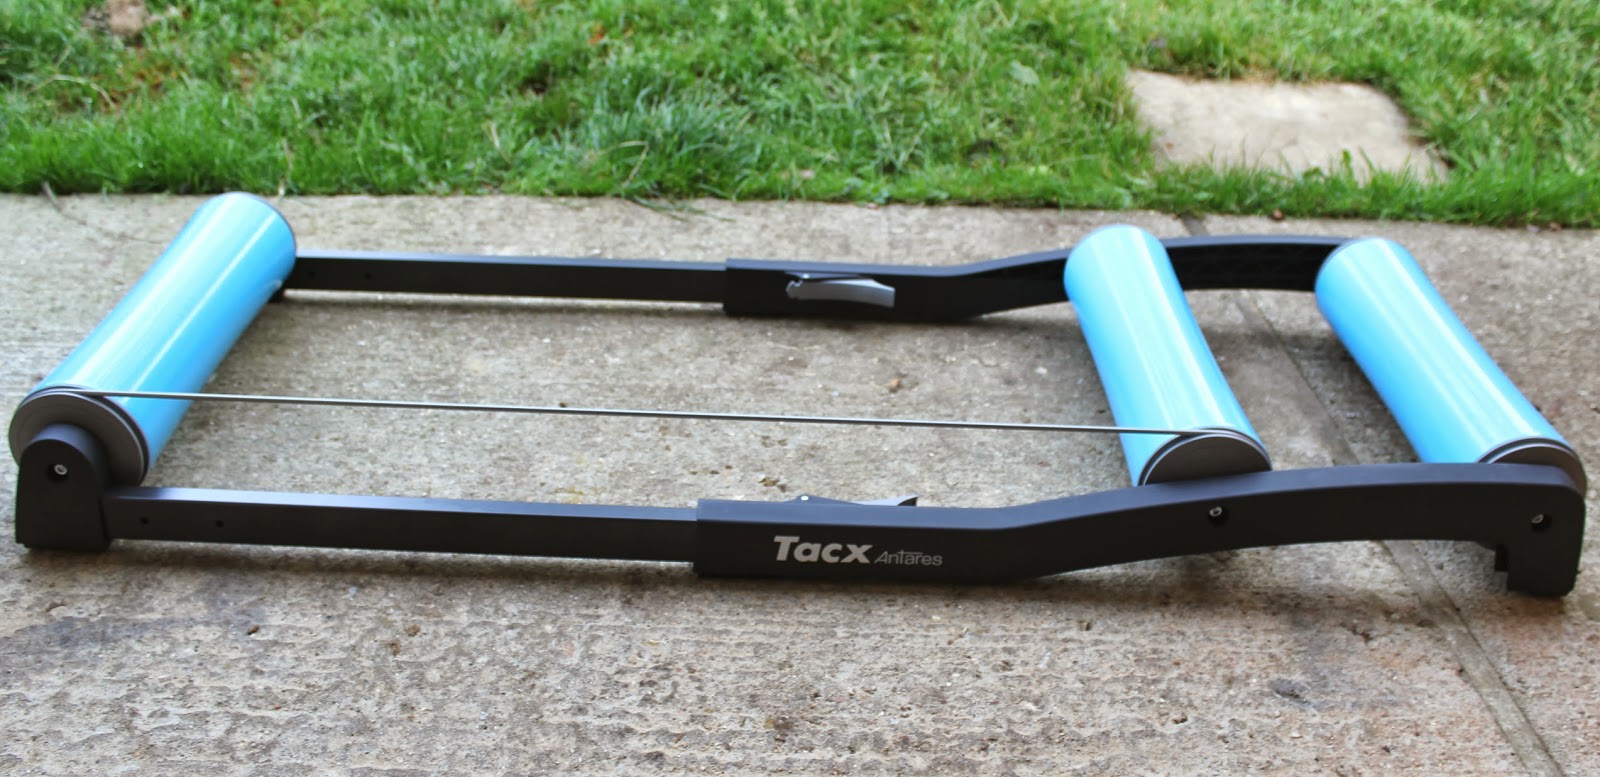 Tacx Antares Rollers Review